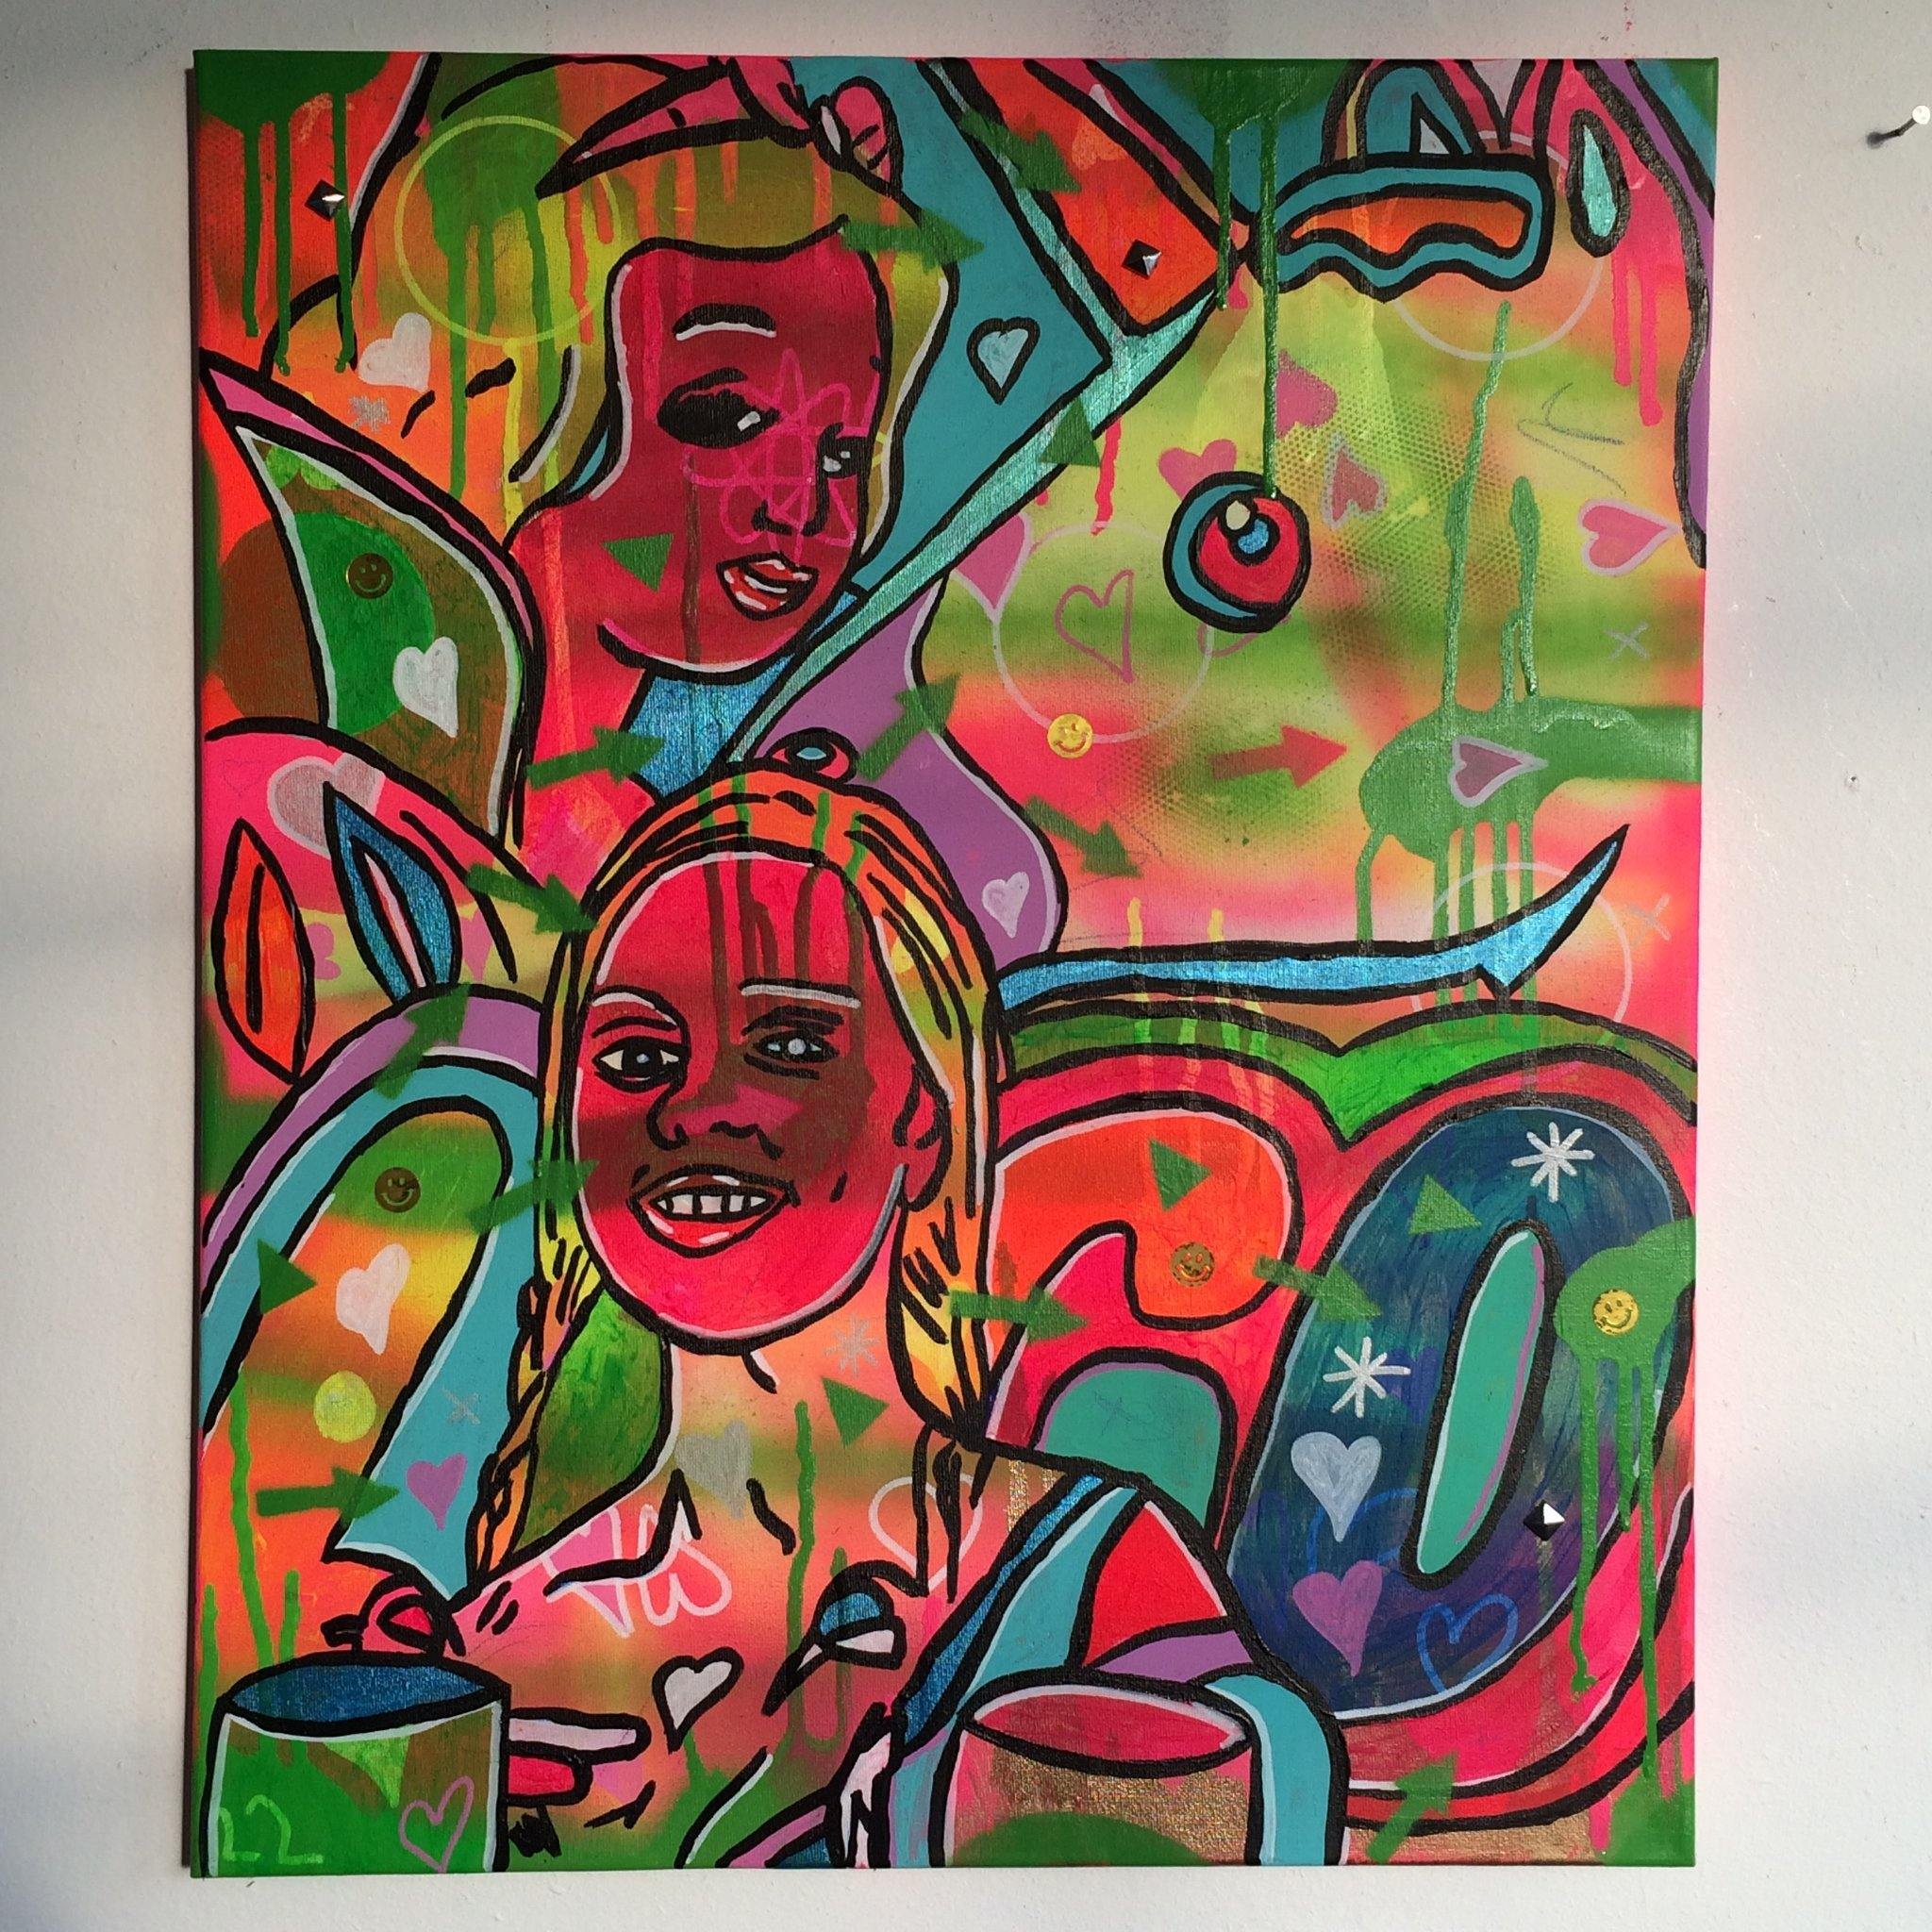 Bath Bomb by Barrie J Davies 2015, mixed media on canvas, 50cm x 60cm, unframed. Barrie J Davies is an Artist - Psychedelic pop surreal street art inspired Artist based in Brighton England UK - Paintings, Prints & Editions available.